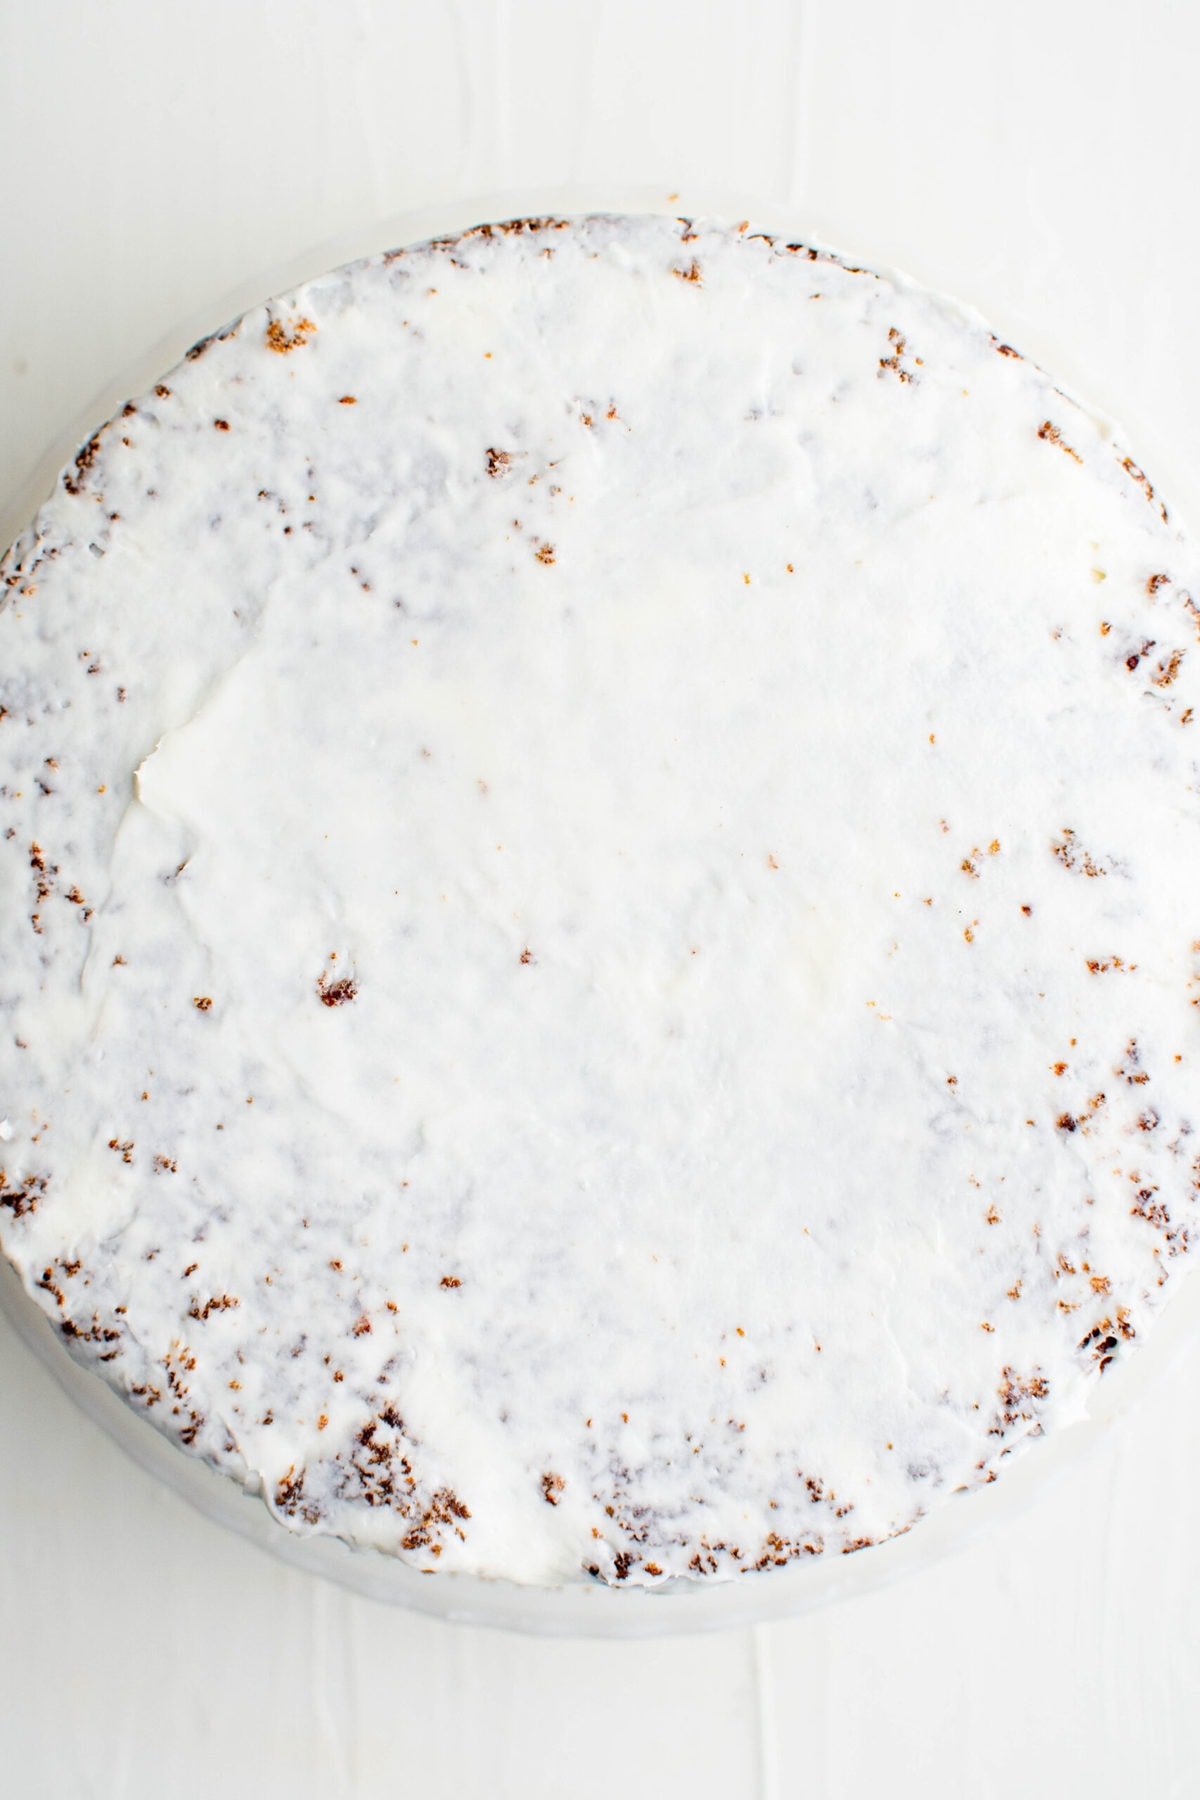 carrot cake with crumb coat layer of frosting